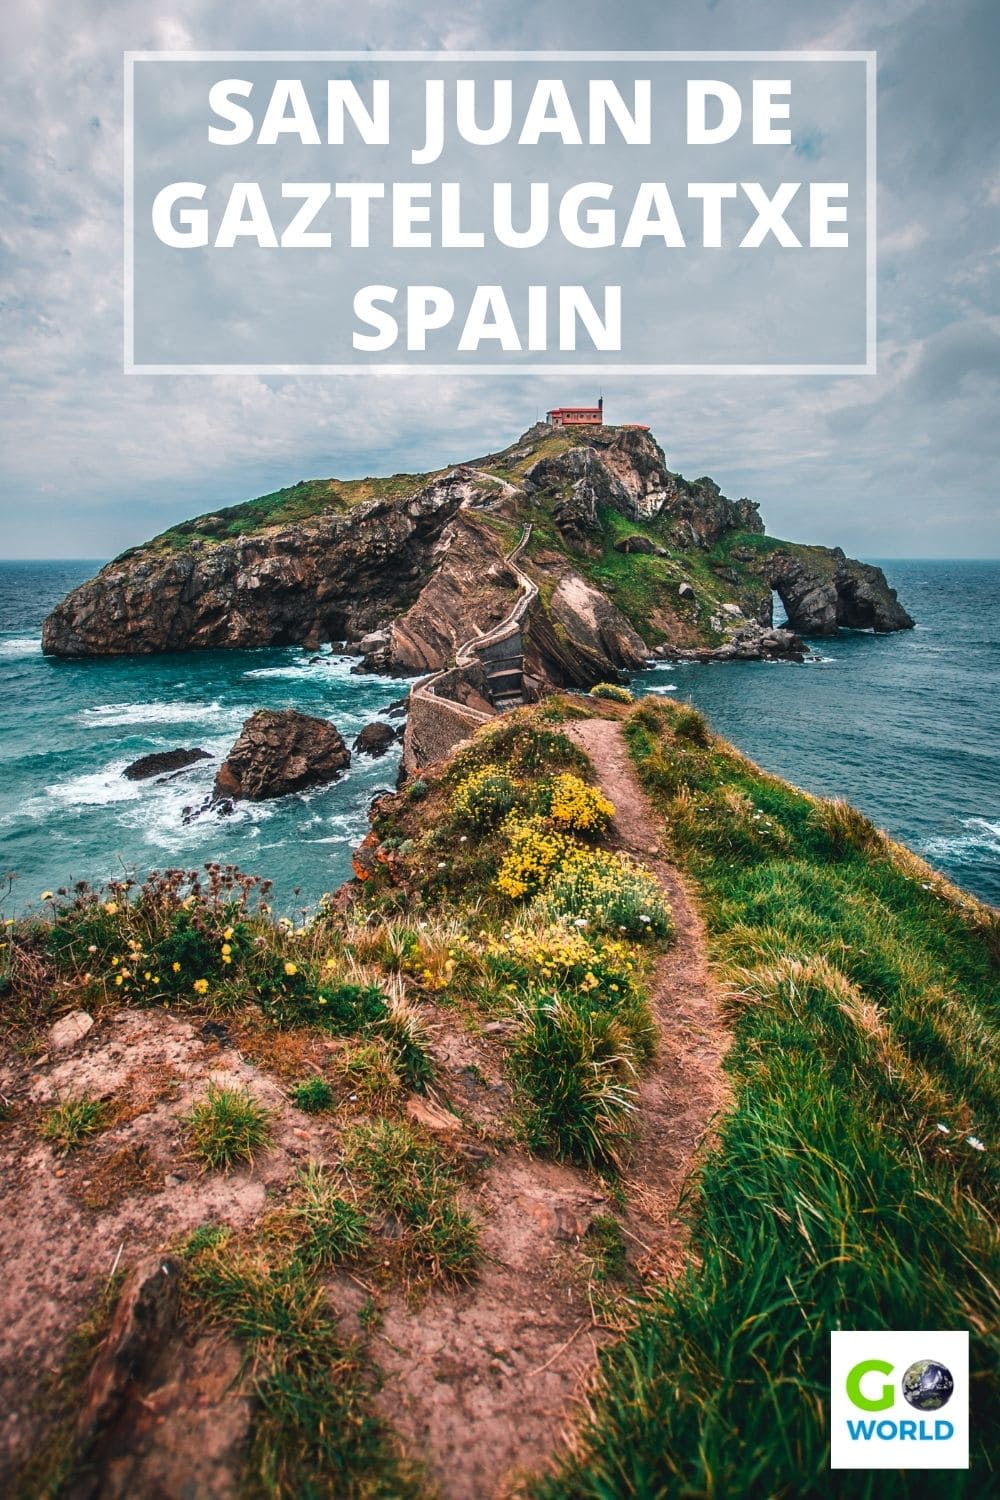 San Juan de Gaztelugatxe, Spain is known for being a filming site for Game of Thrones but it is also a place of stunning natural beauty. #spaintravel #gameofthroneslocations #SanJuandeGaztelugatxe